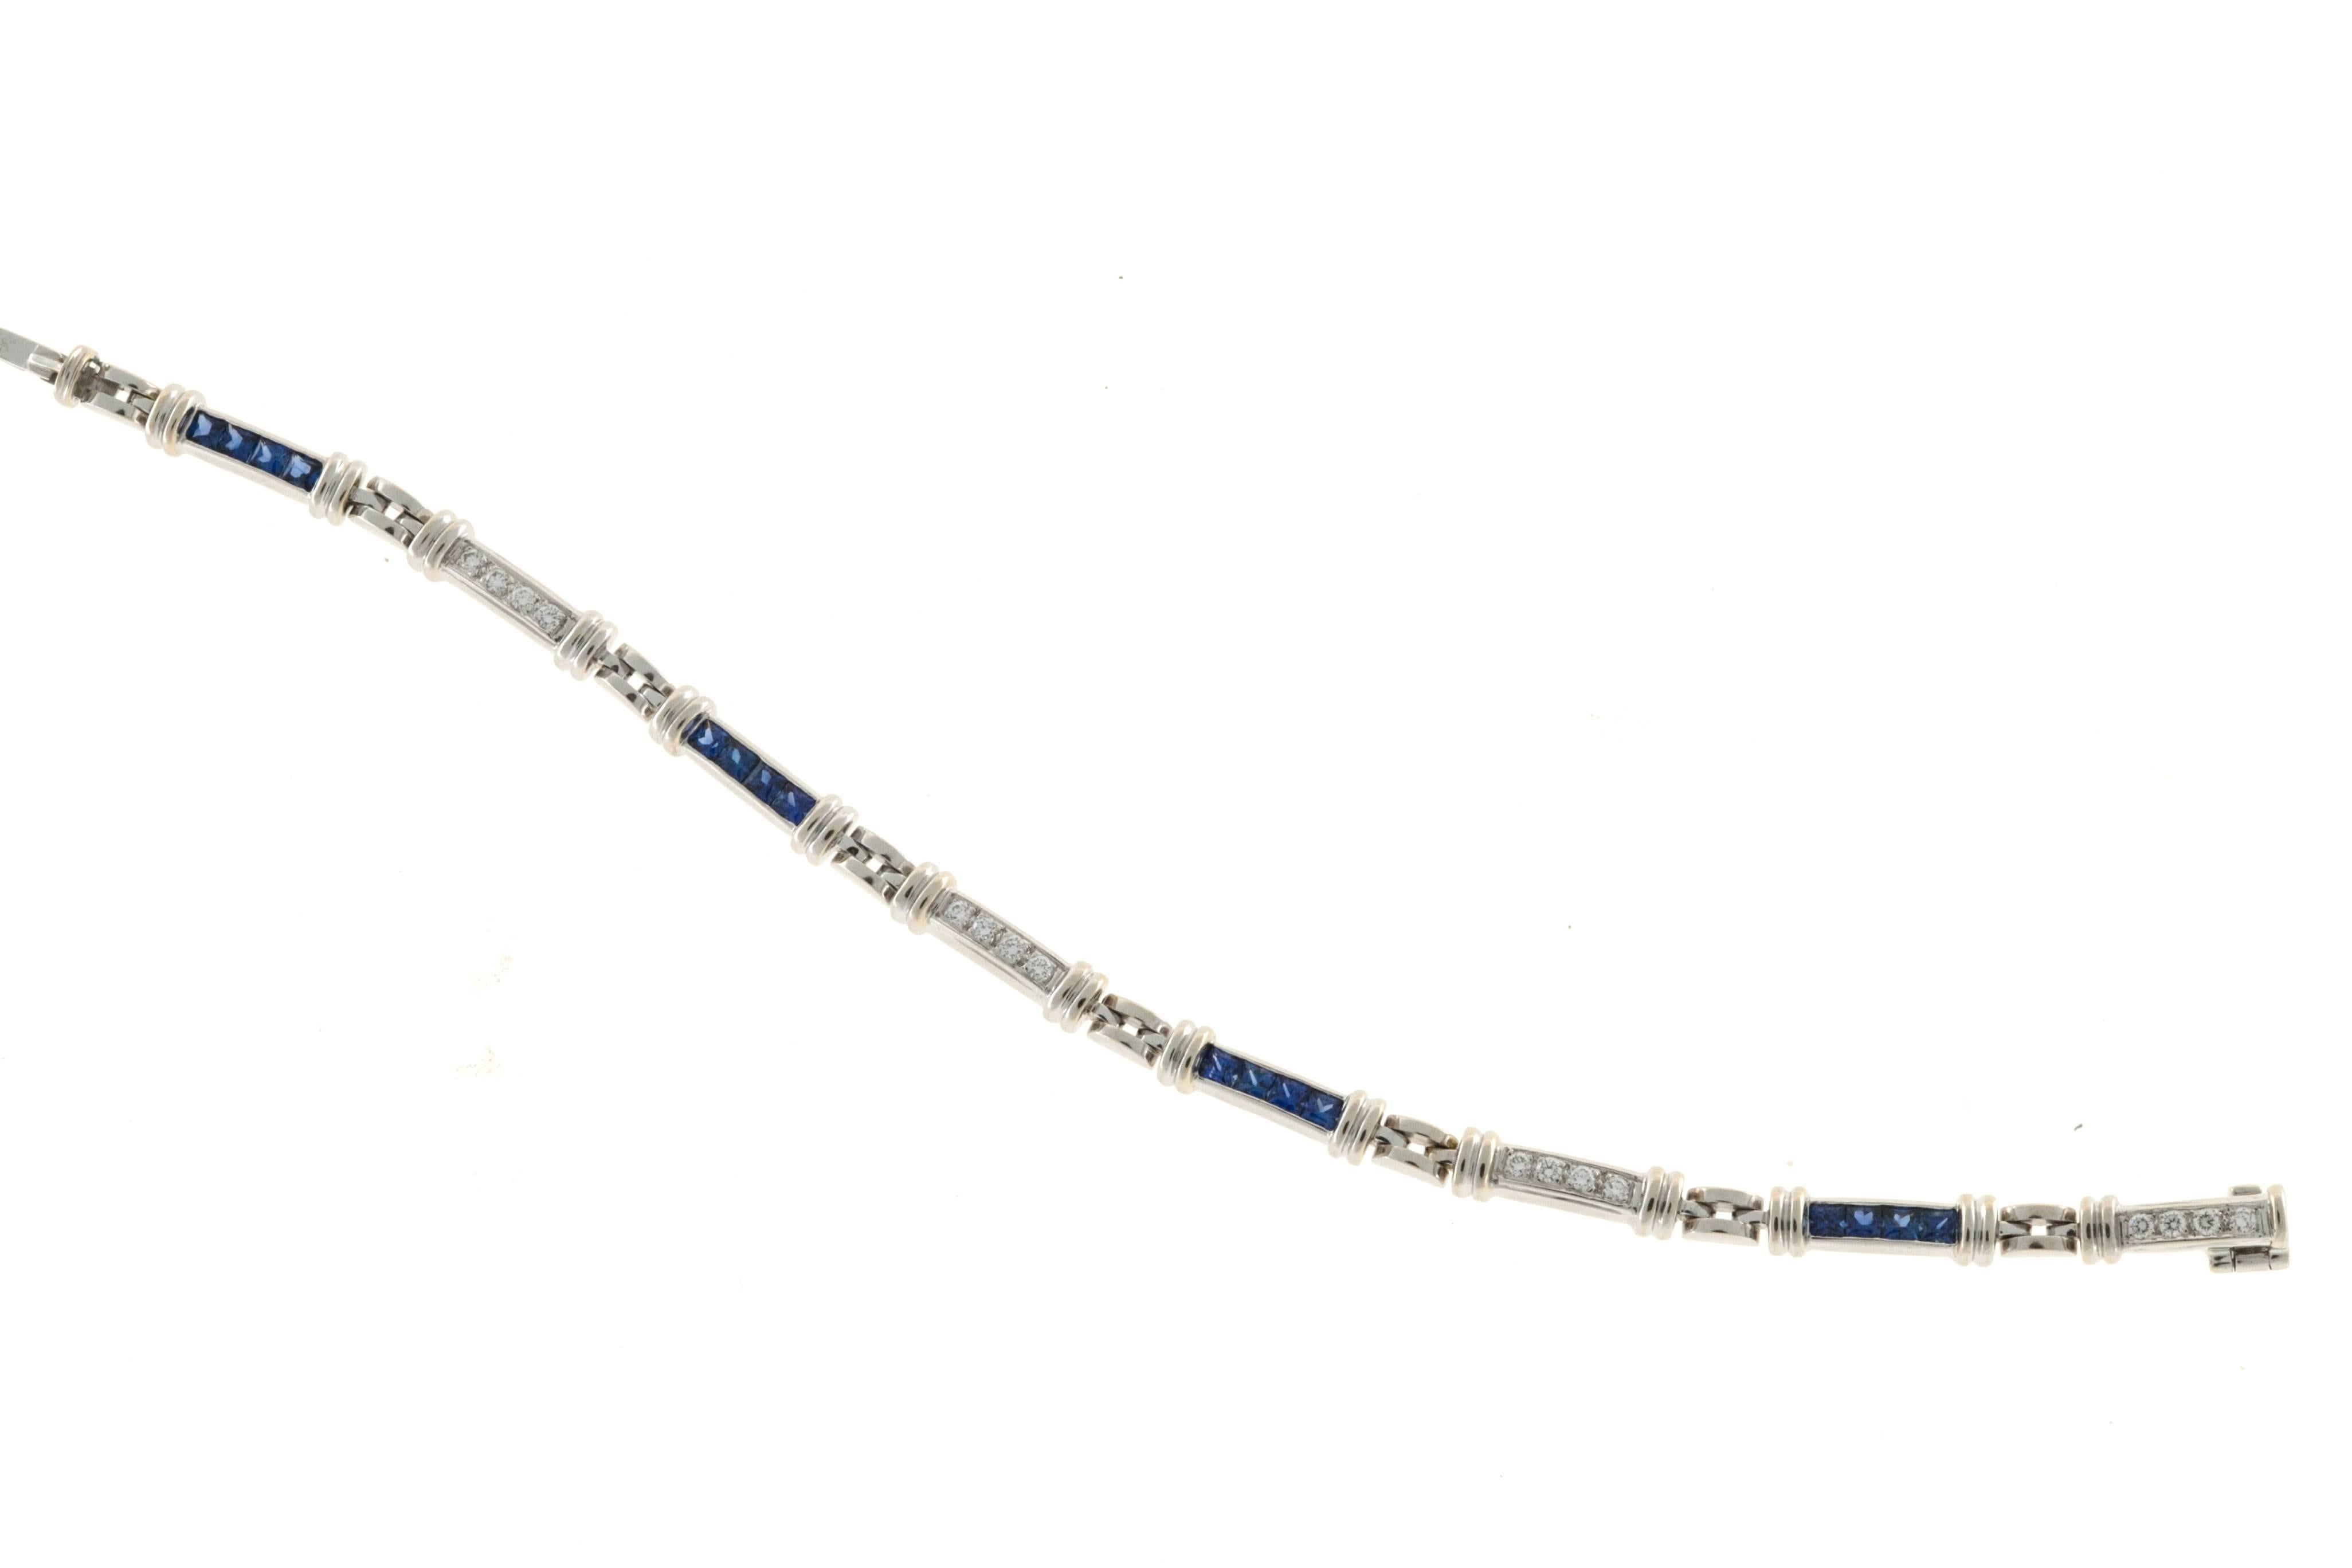 18k white gold bracelet from the design Spark. Certified by the GIA in the setting.

16 square gem cornflower blue Sapphires, approx. total weight 2.30cts, VS-SI, 2.50mm, natural  corundum and simple heat only, GIA certificate #2155946024
16